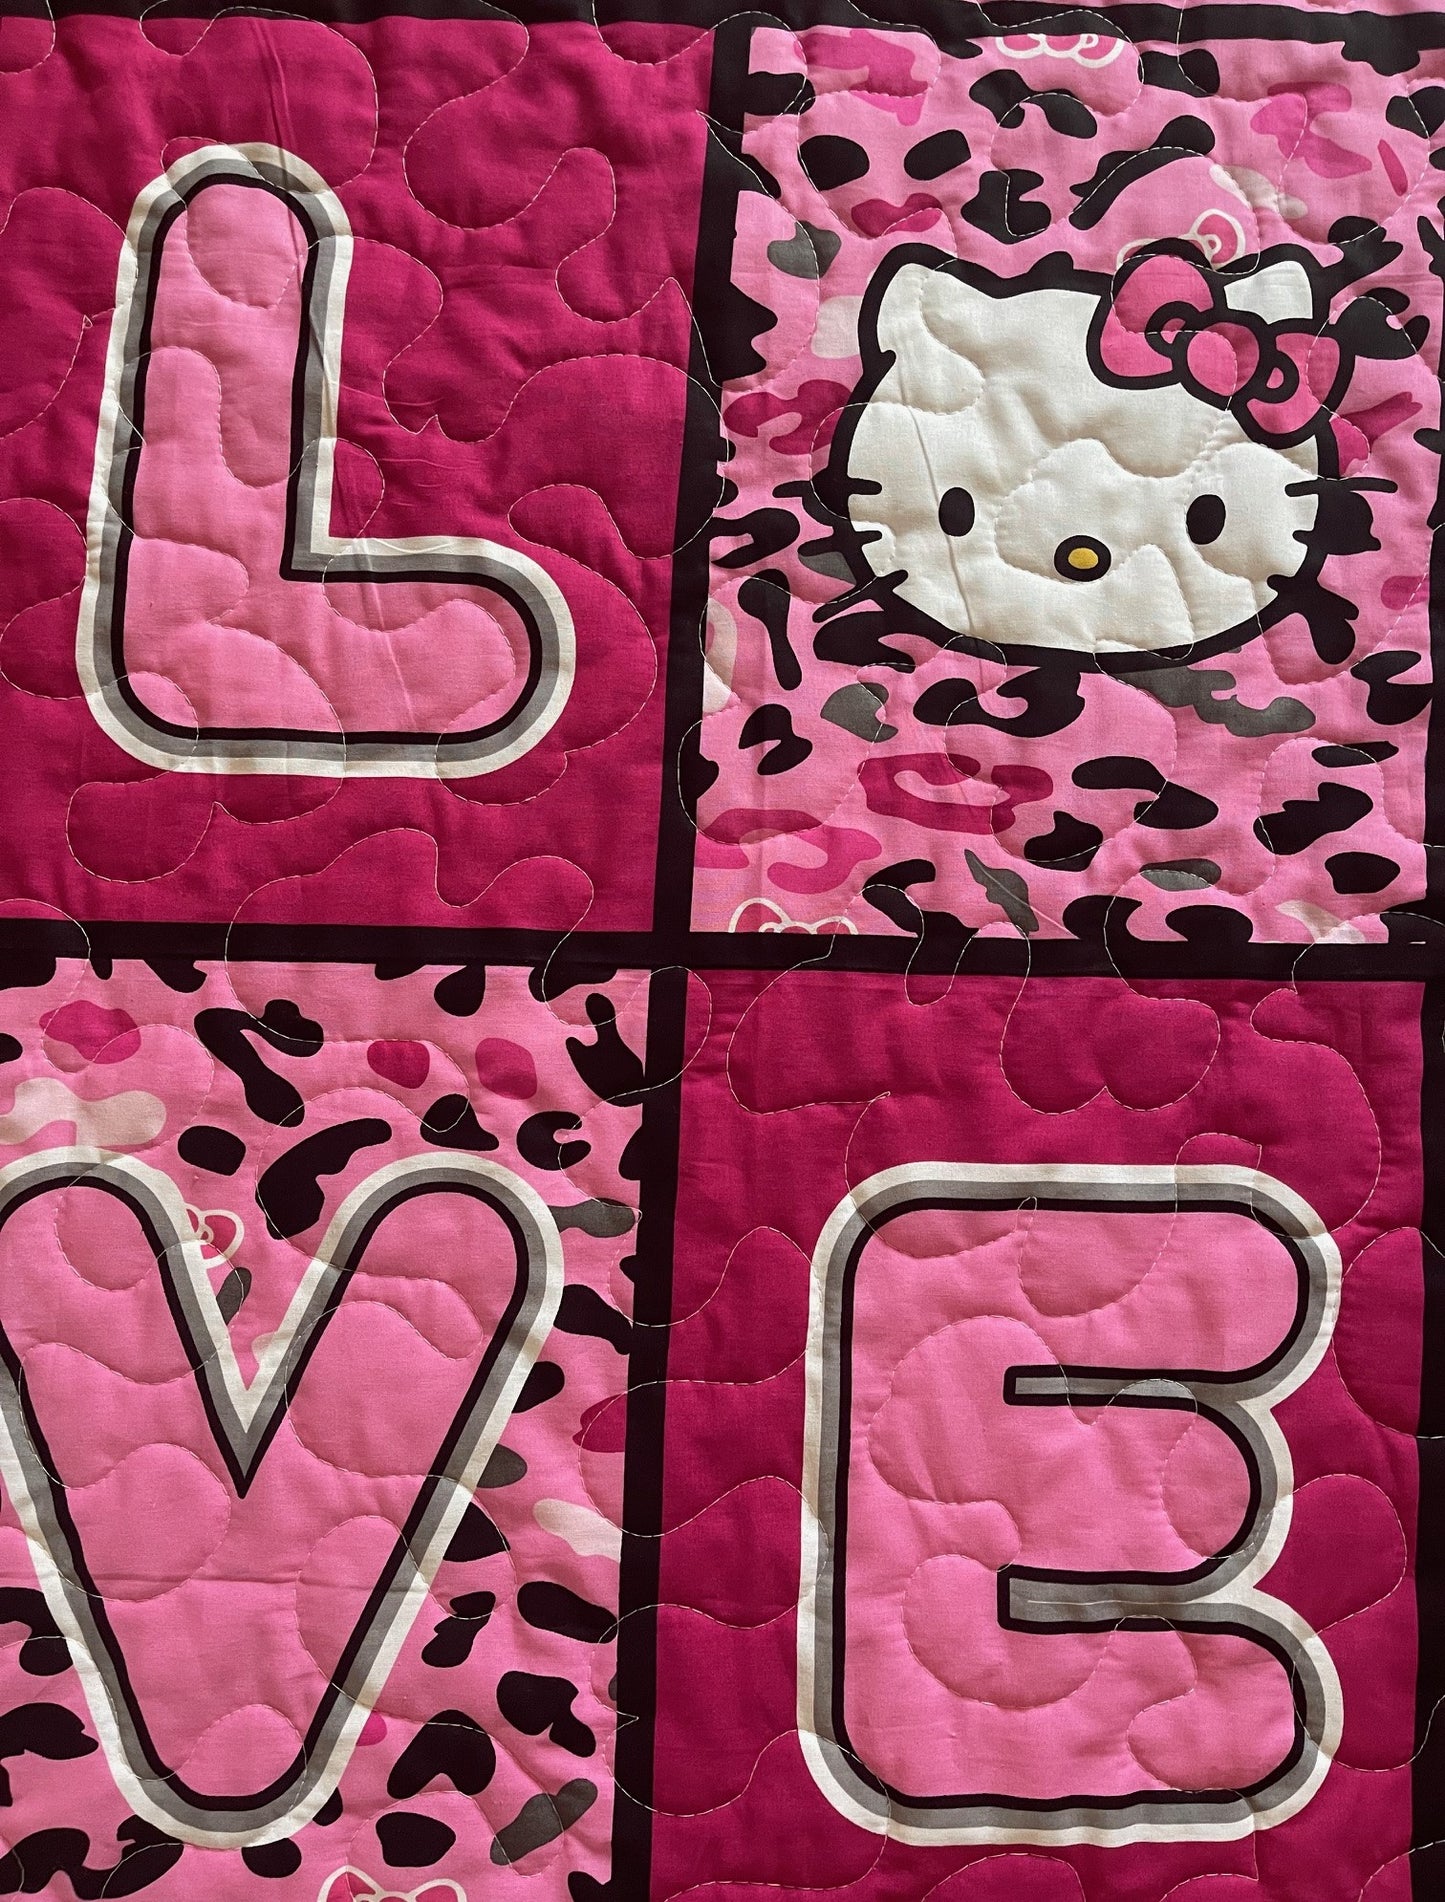 HELLO KITTY LOVE PINK CHEETAH Quilted Blanket 1 AVAILABLE